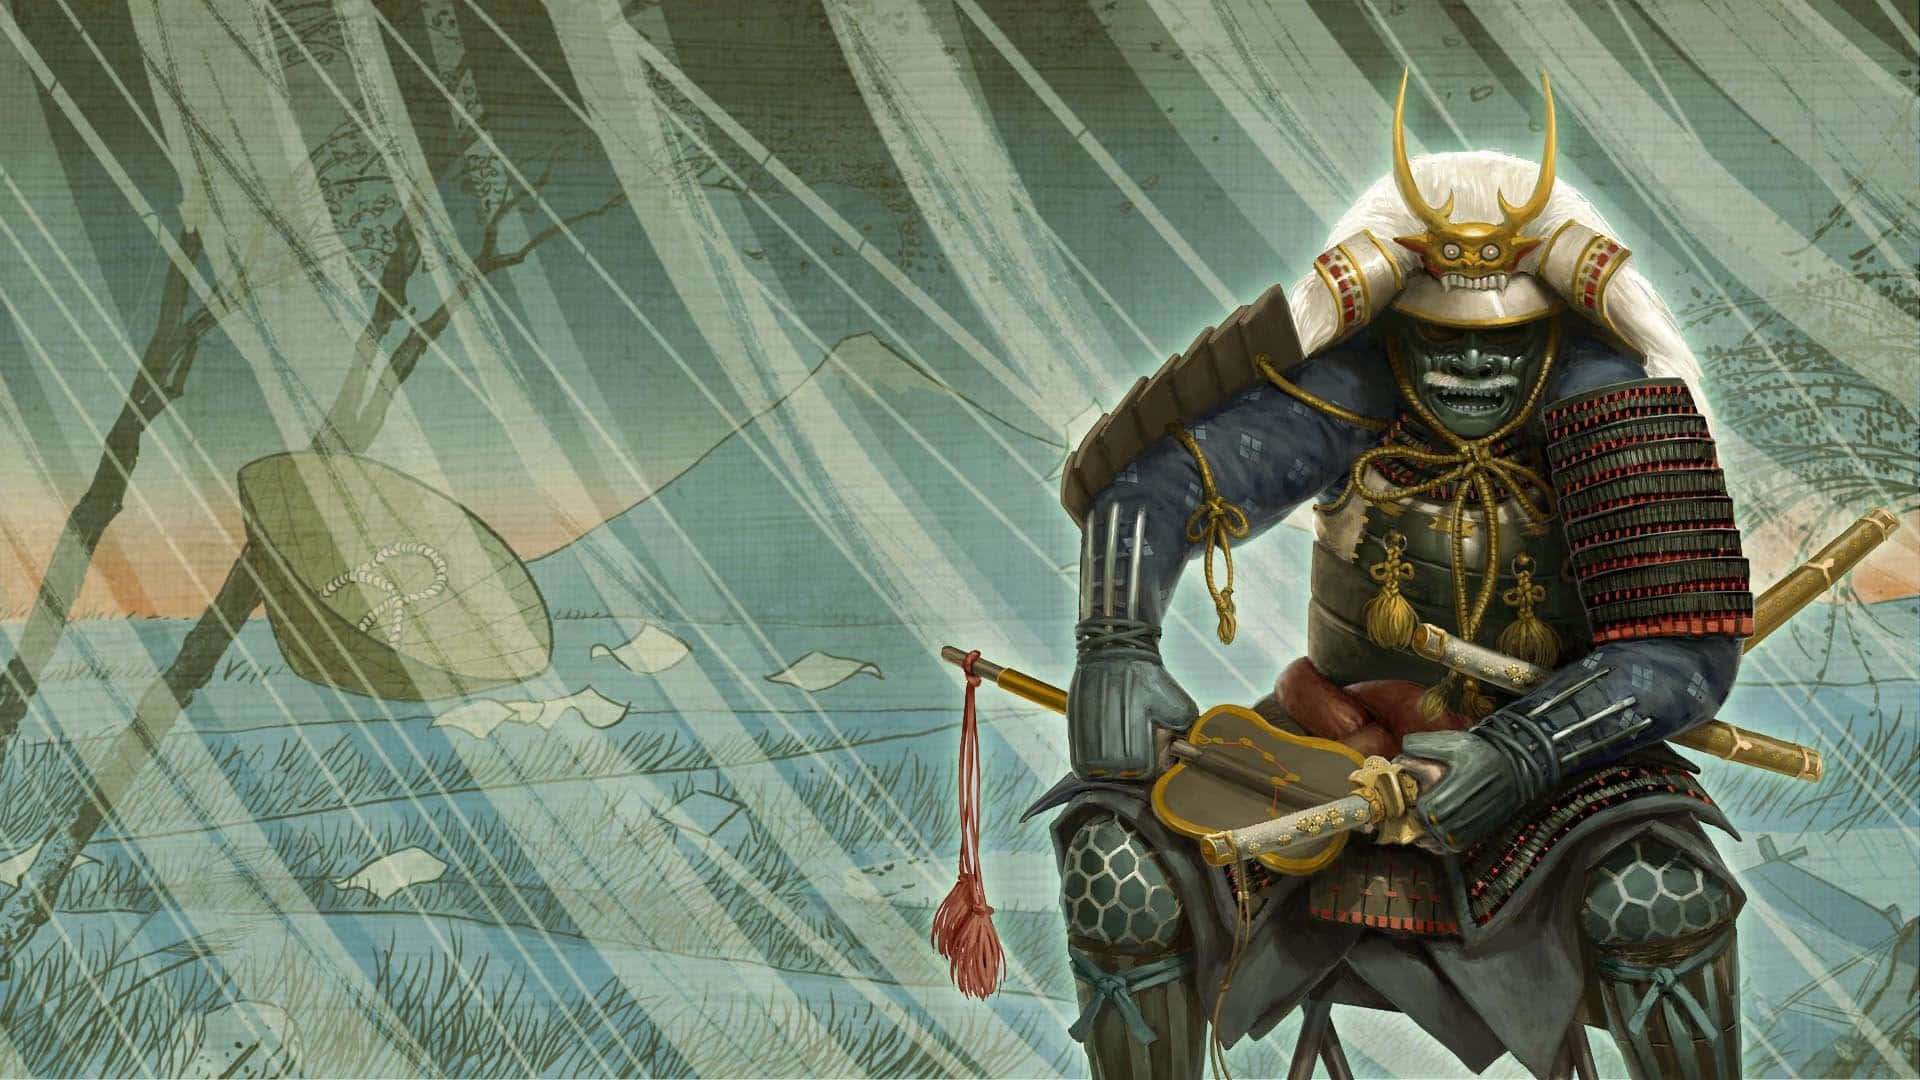 Seize power in the midst of the Sengoku period in the classic RTS game, Shogun Total War Wallpaper